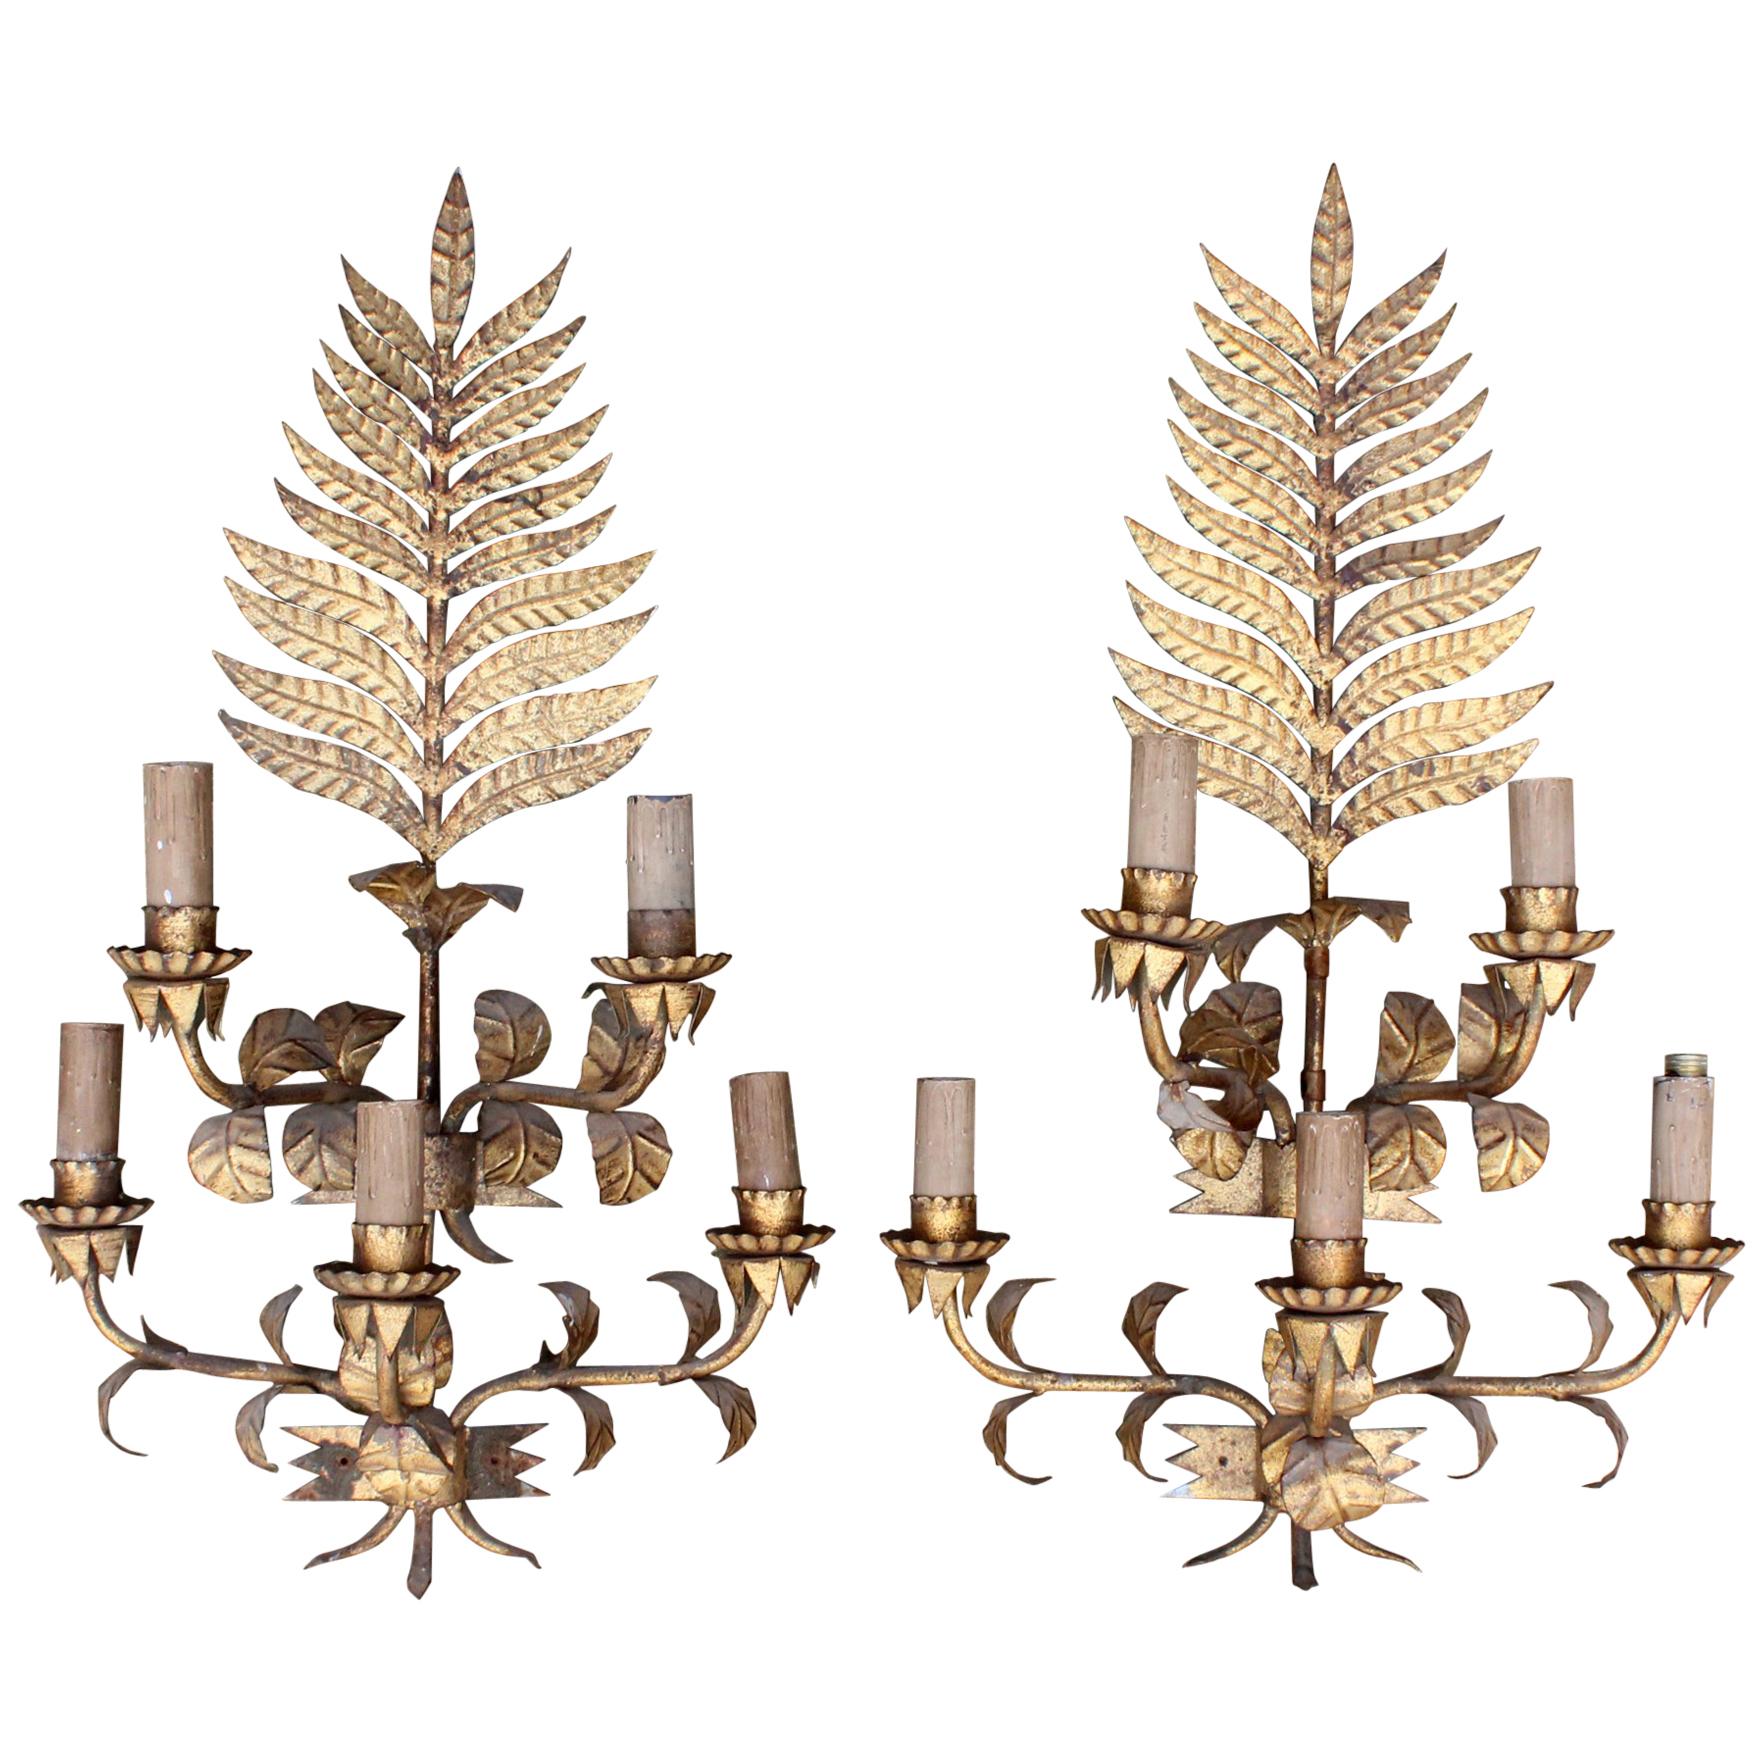 1970s Pair of Spanish Five-Arm Iron Sconces with Floral Motifs